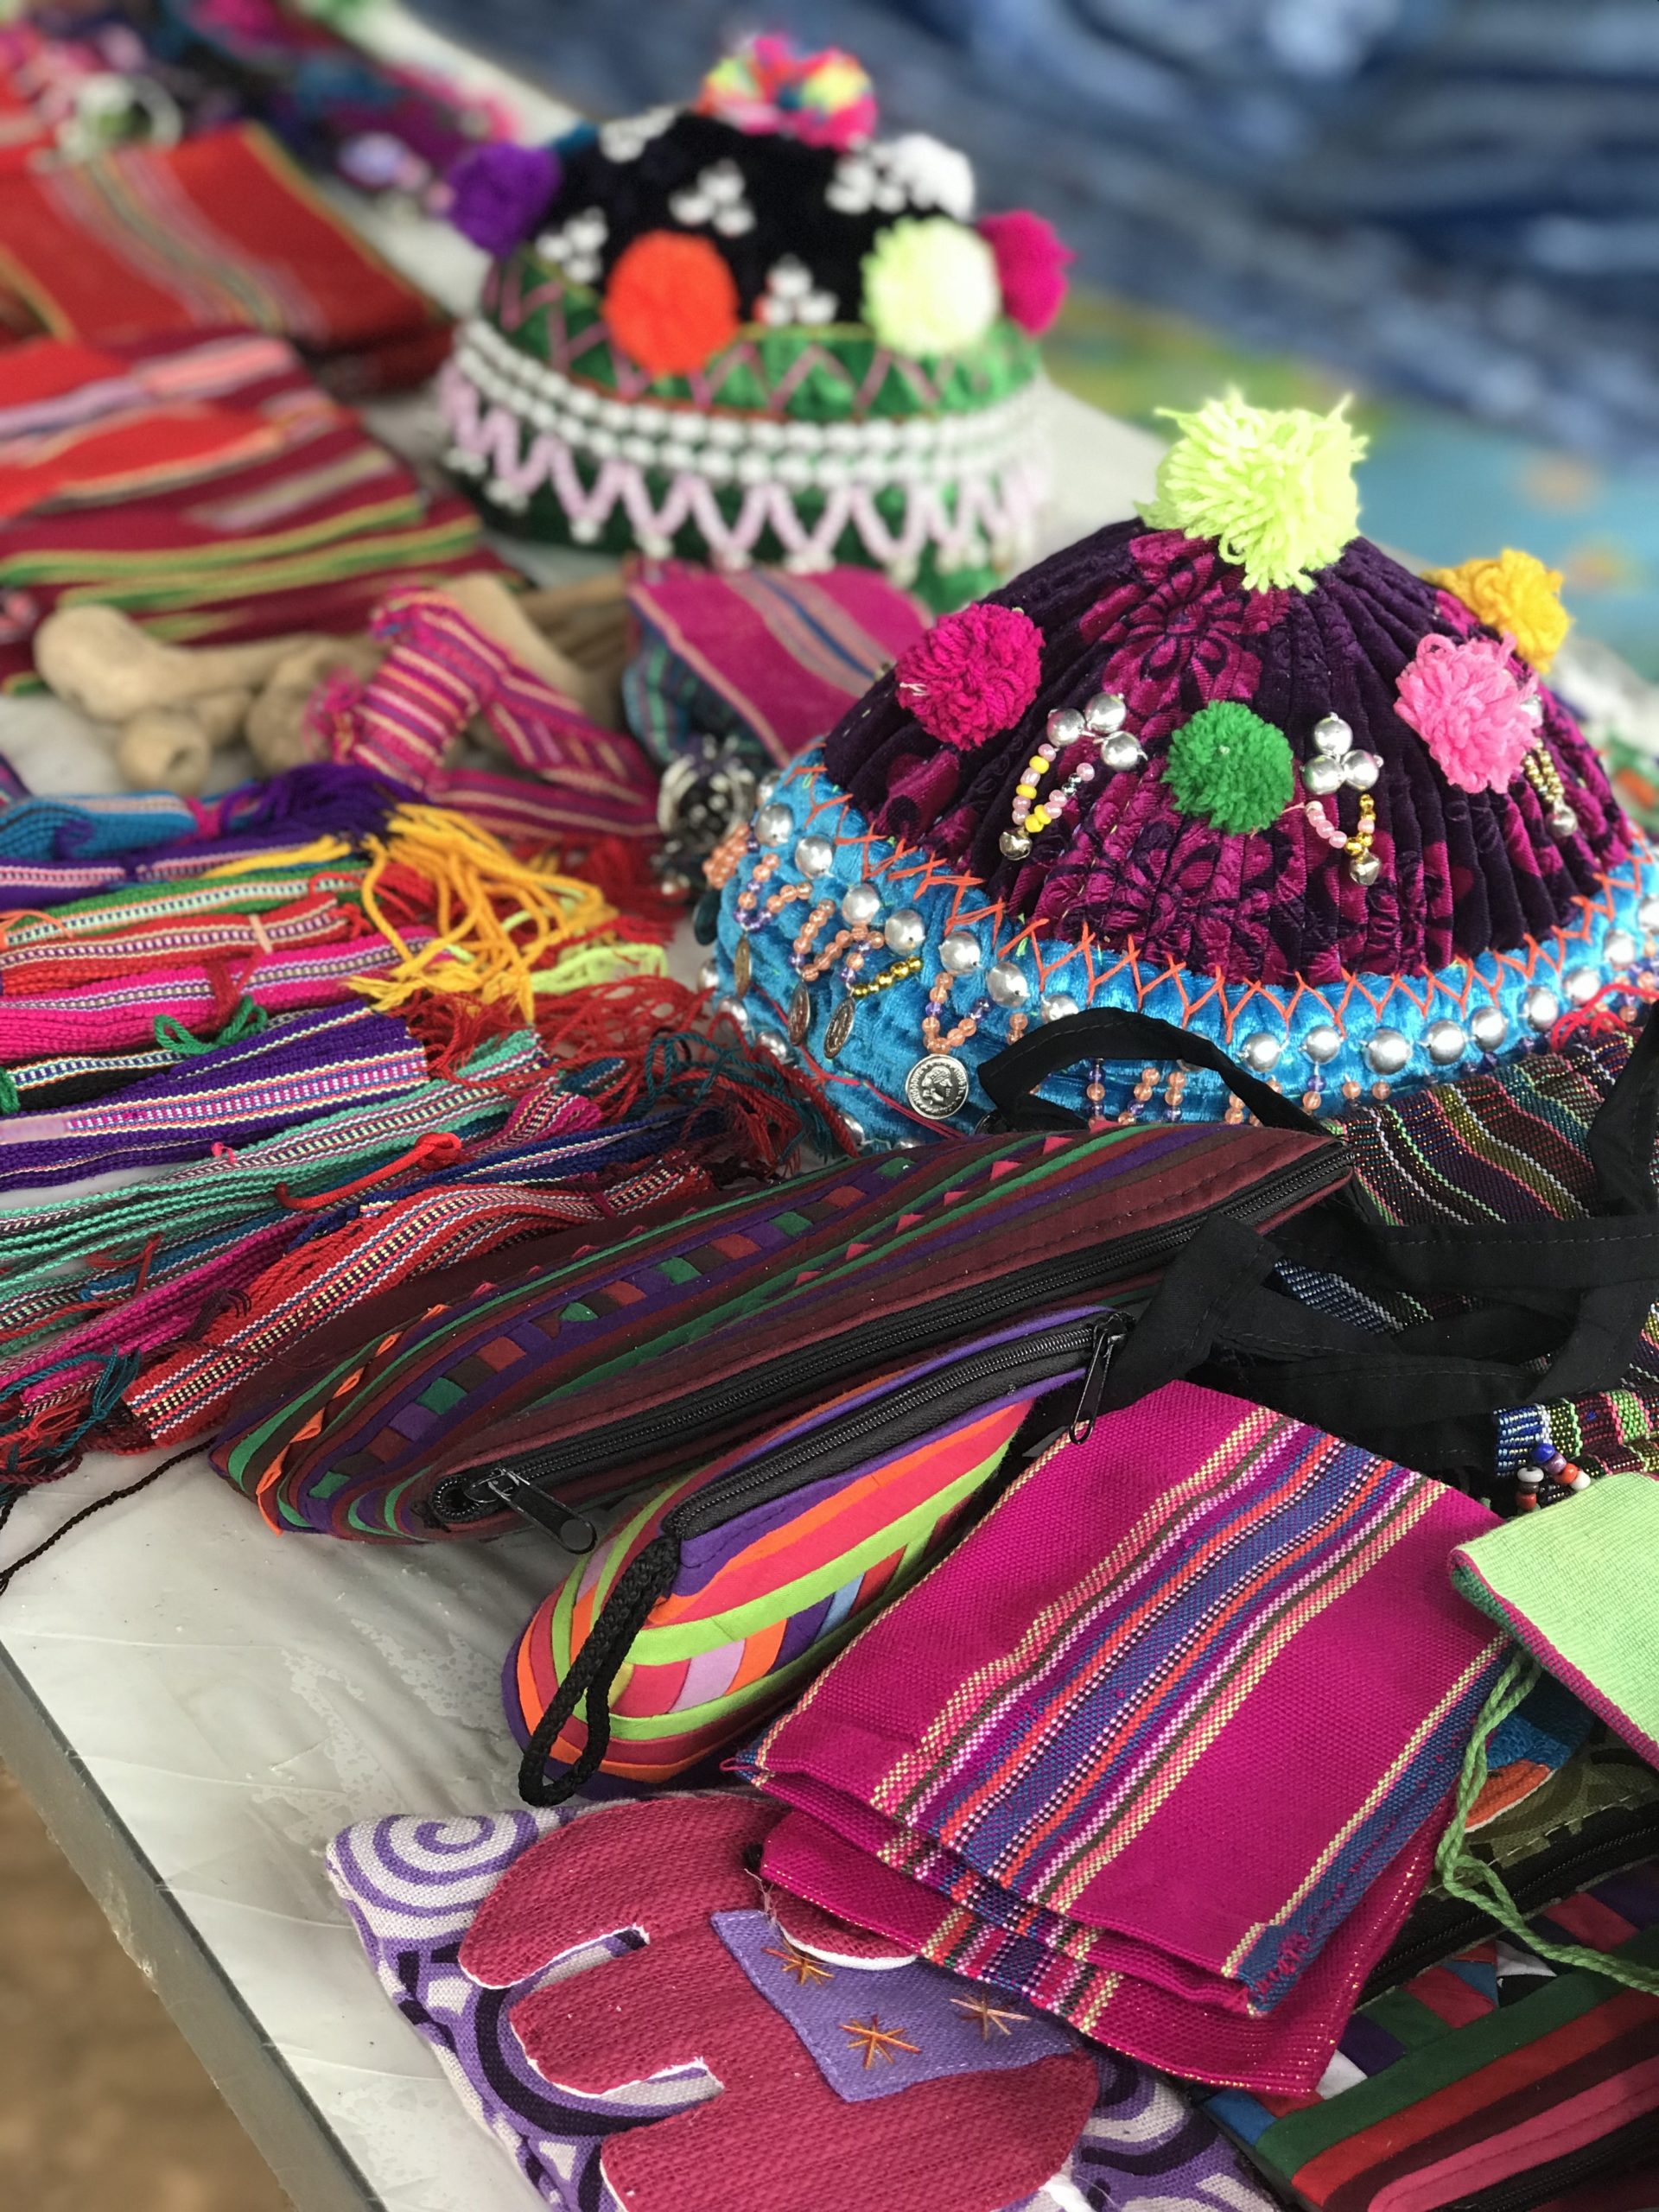 selection of colourful handmade crafts at a market stall in thailans